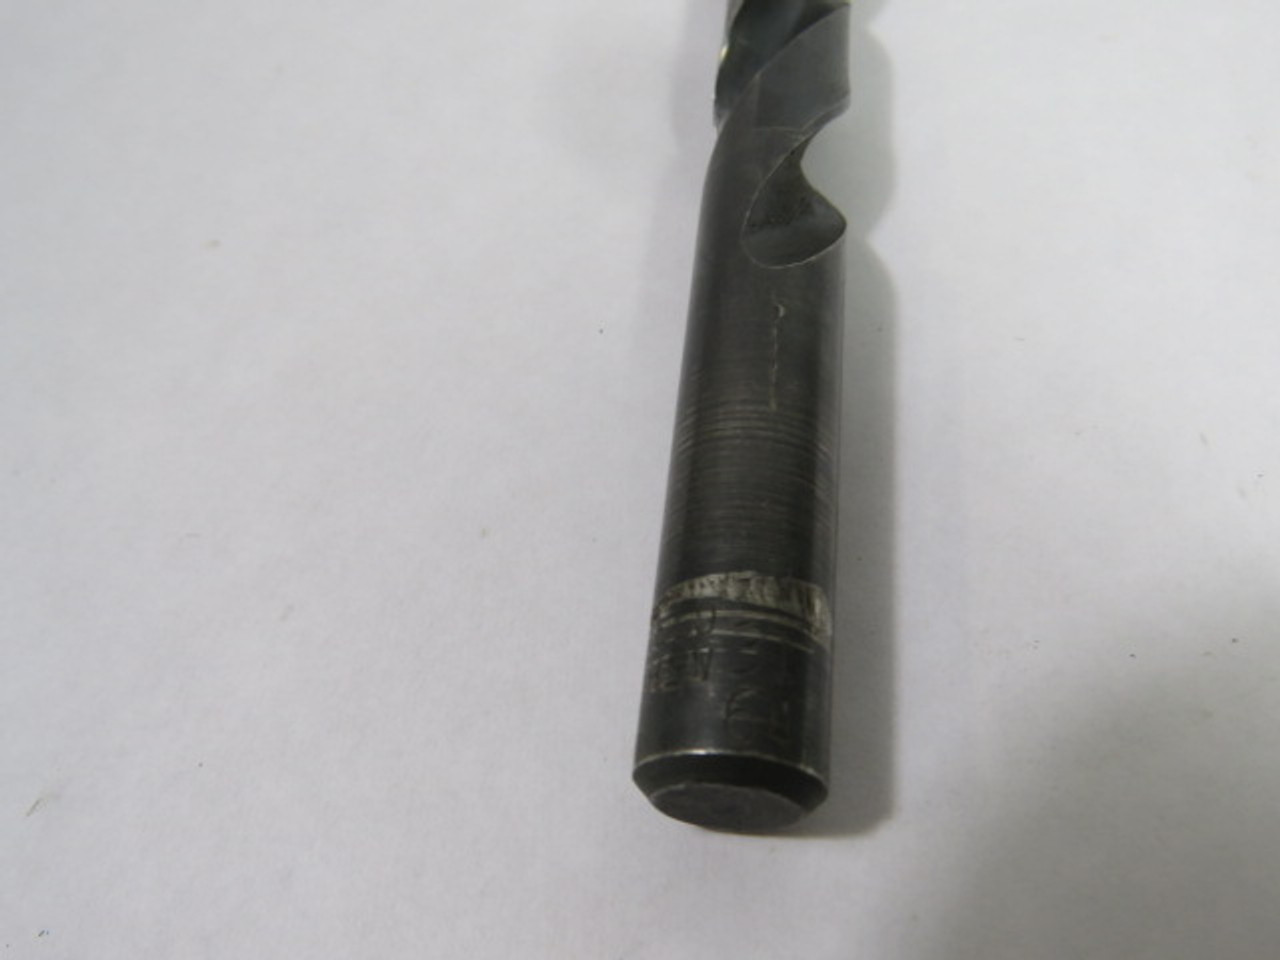 Butterfield HSW Jobber Drill Size 31/64 Total Length 5-3/4" USED